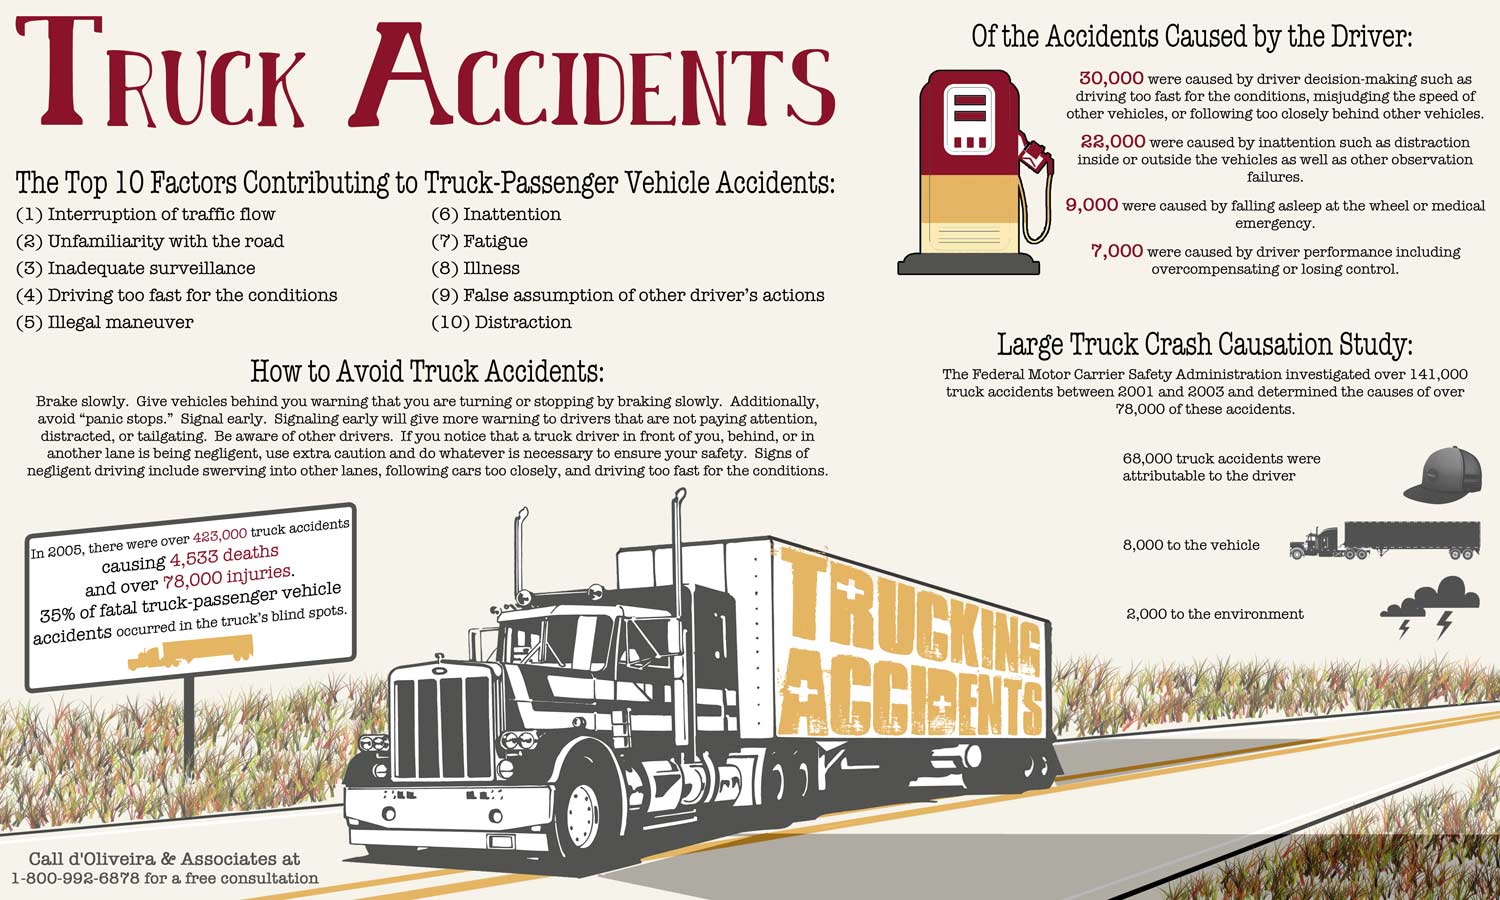 Trucking Accidents and Factors Contributing to Trucking Accident Statistics Infographic